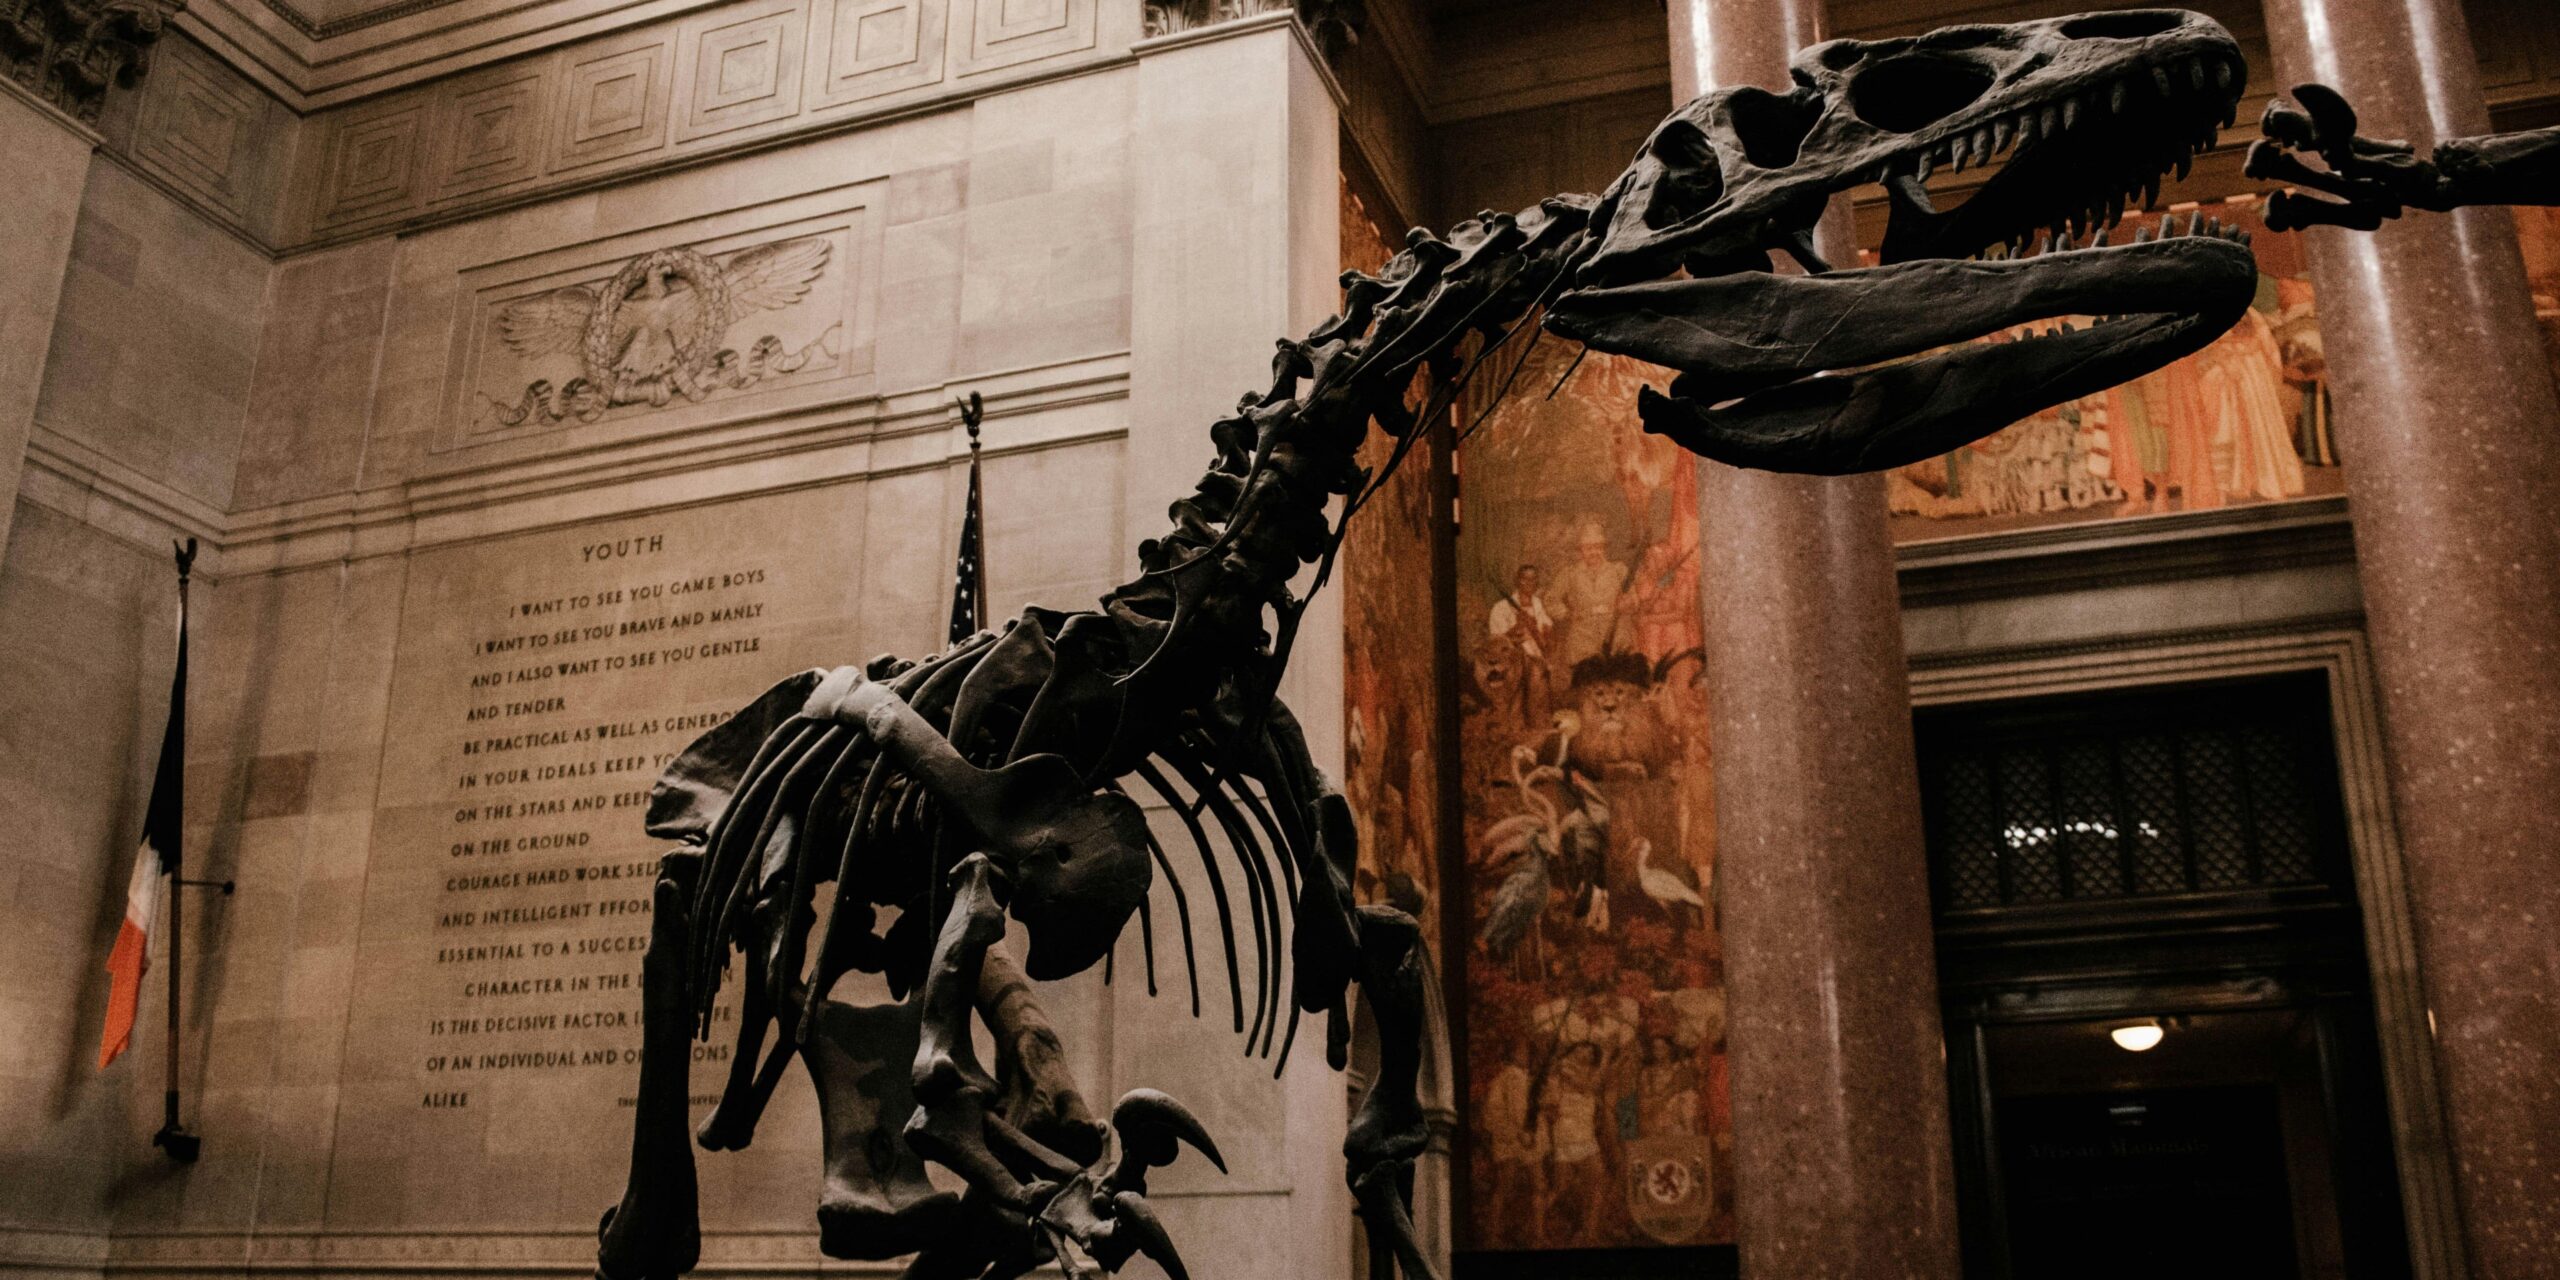 Visit The American Museum of Natural History’s New Expansion